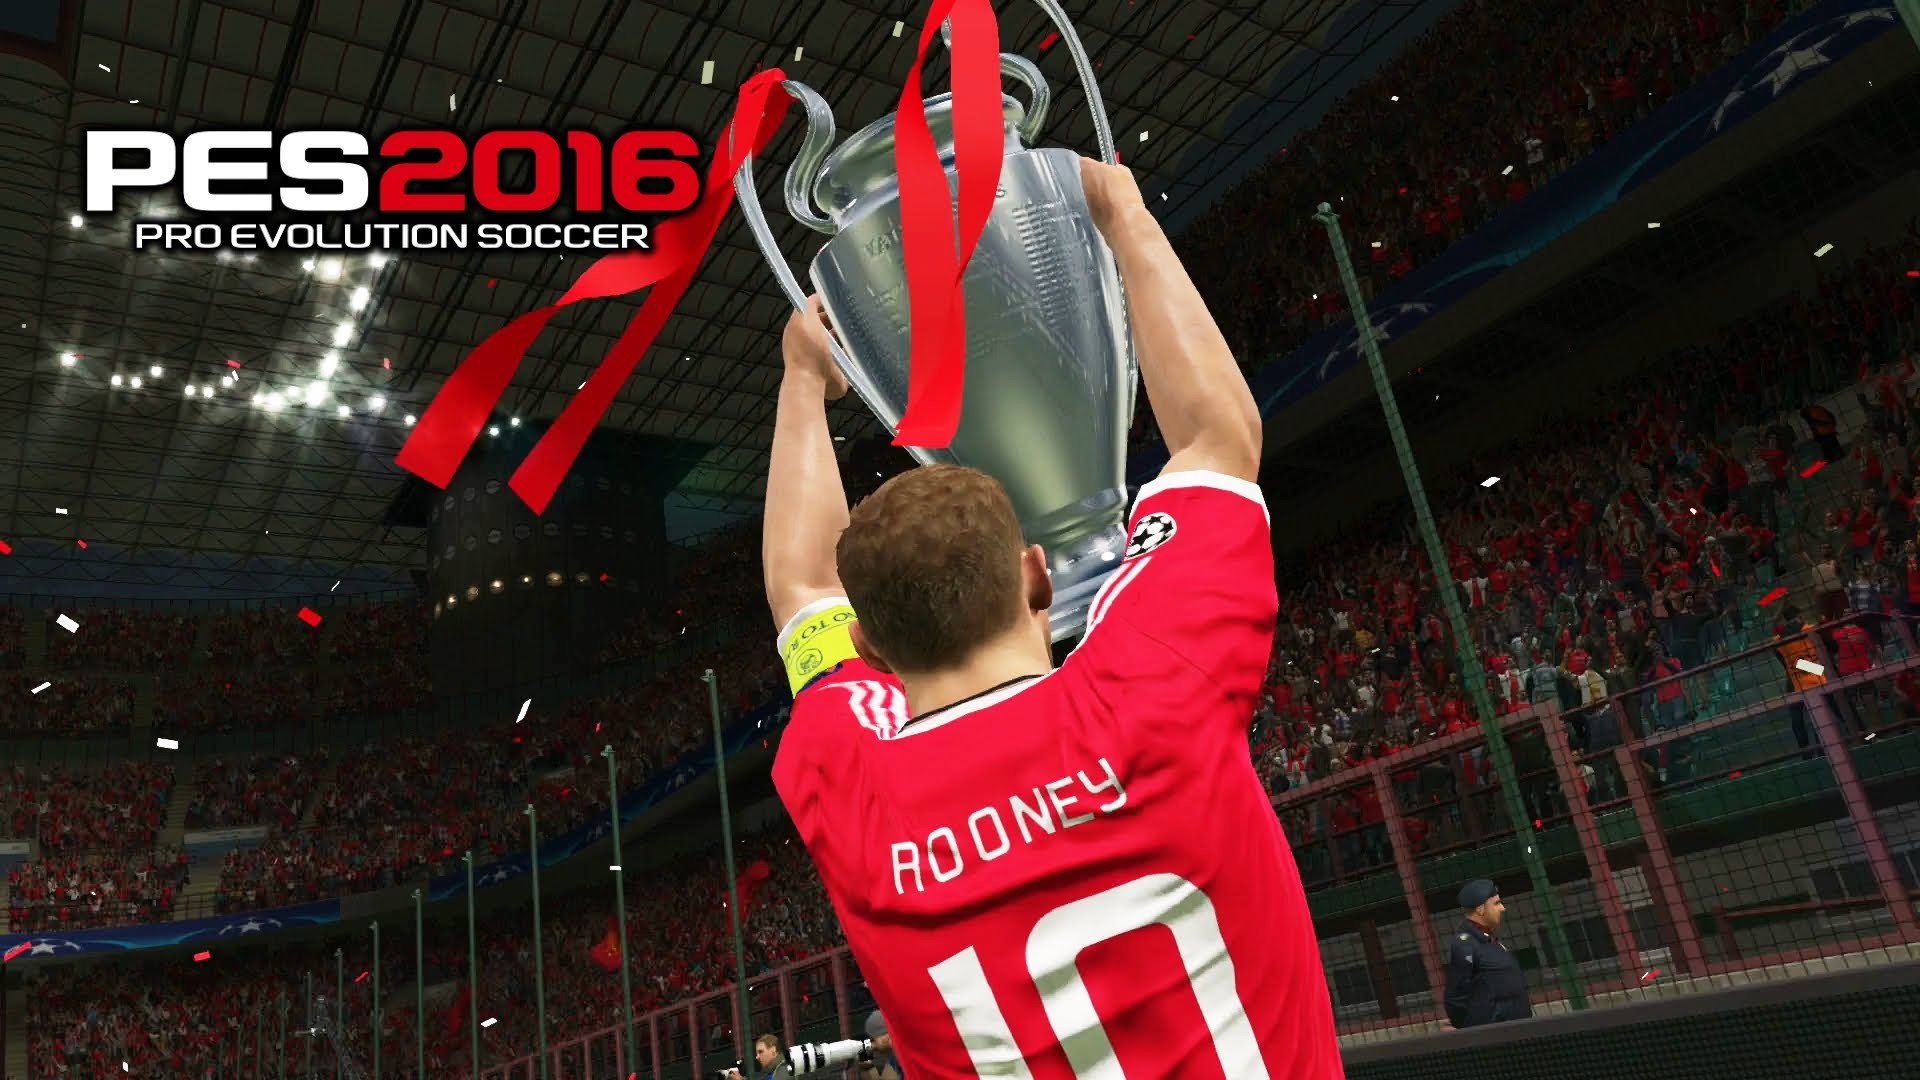 Pes 2016 Final Champions League Barcelona Vs Manchester - Manchester United Background 2016 - HD Wallpaper 